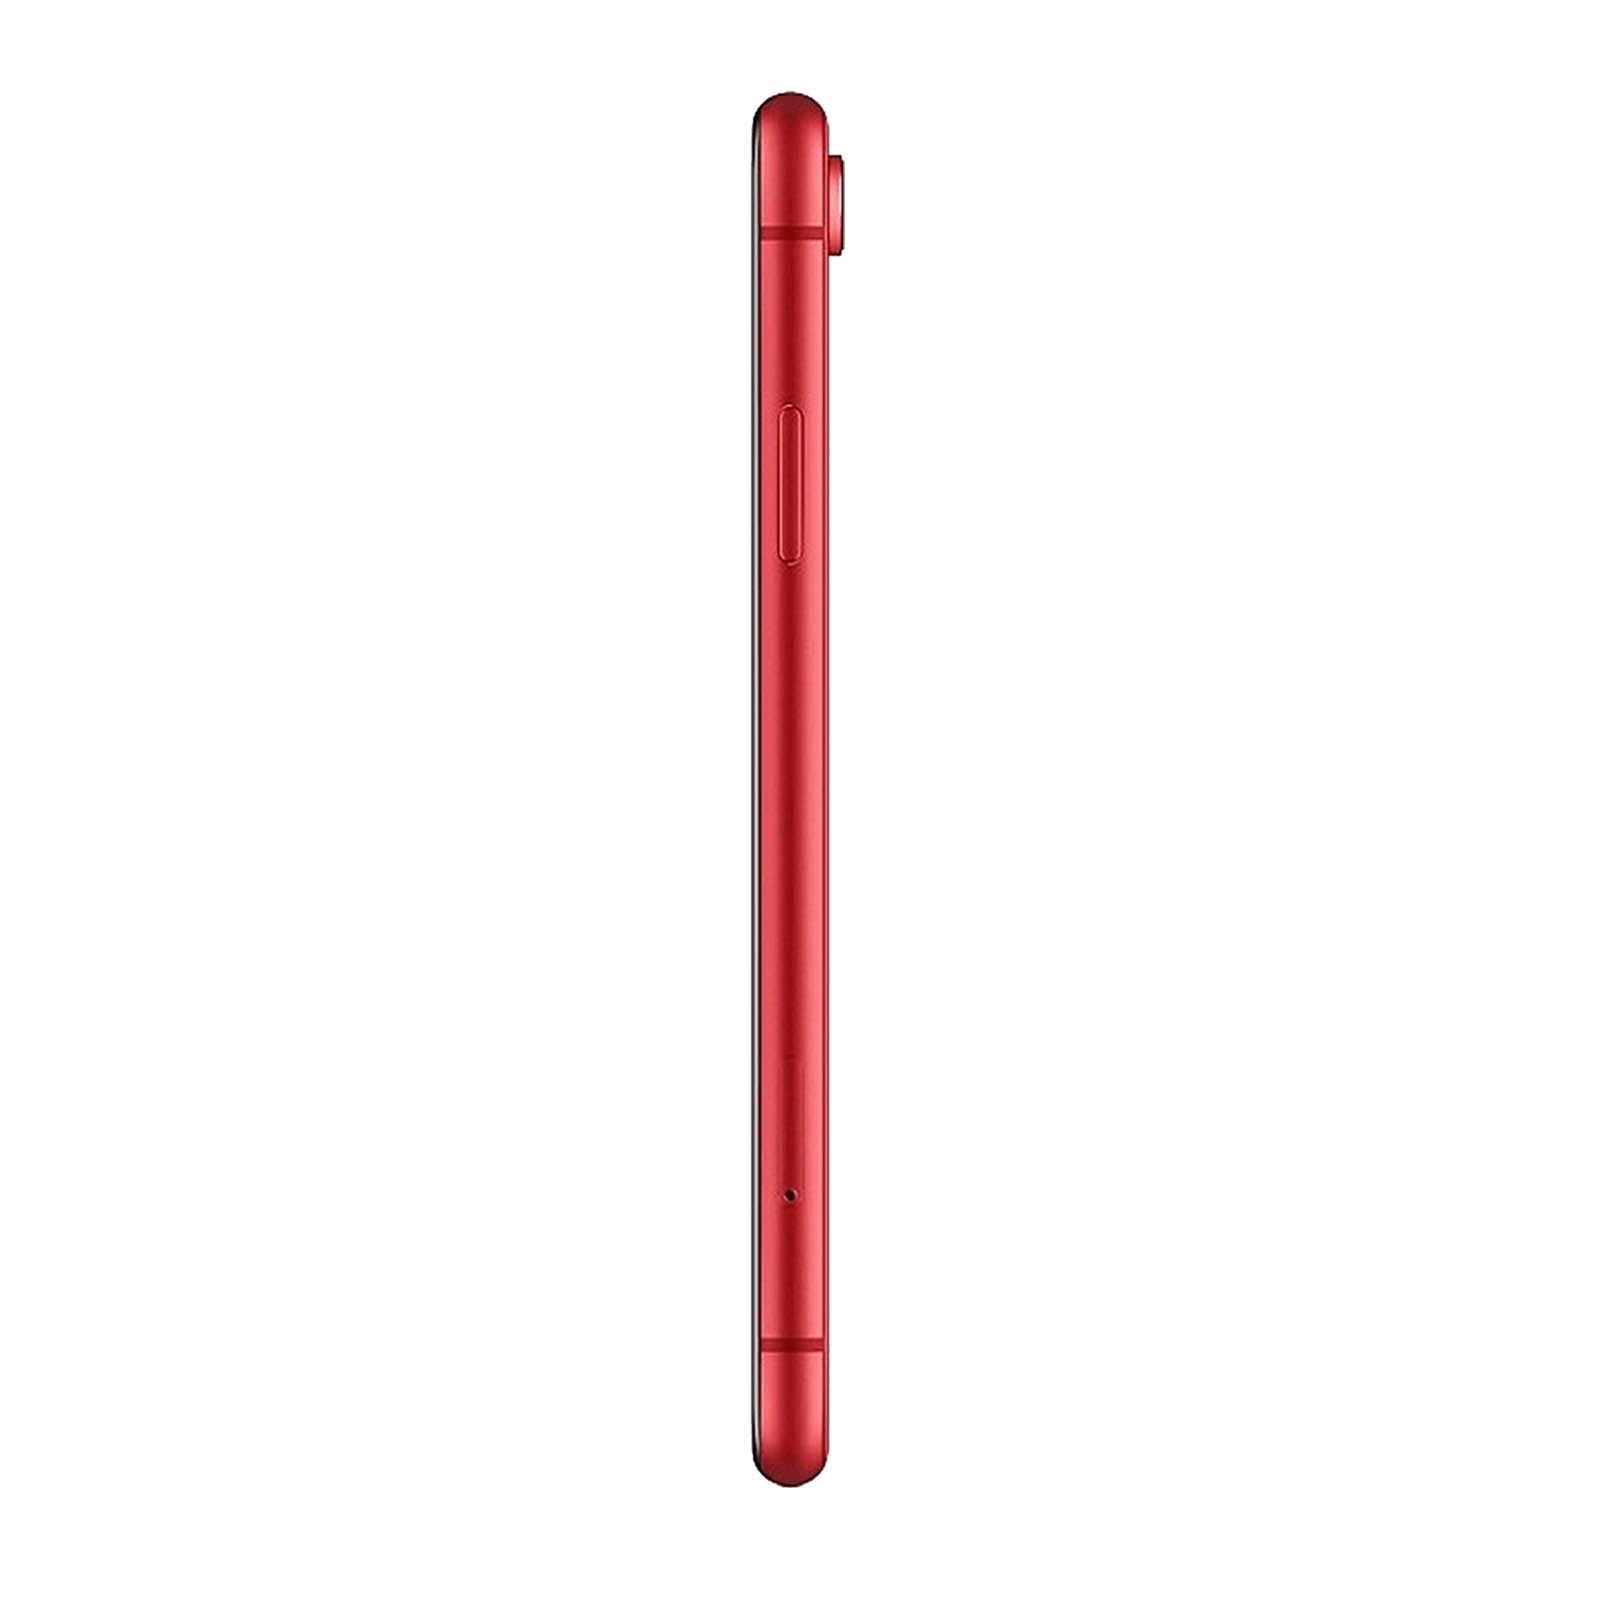 Apple iPhone XR 256GB Product Red Fair - T-Mobile